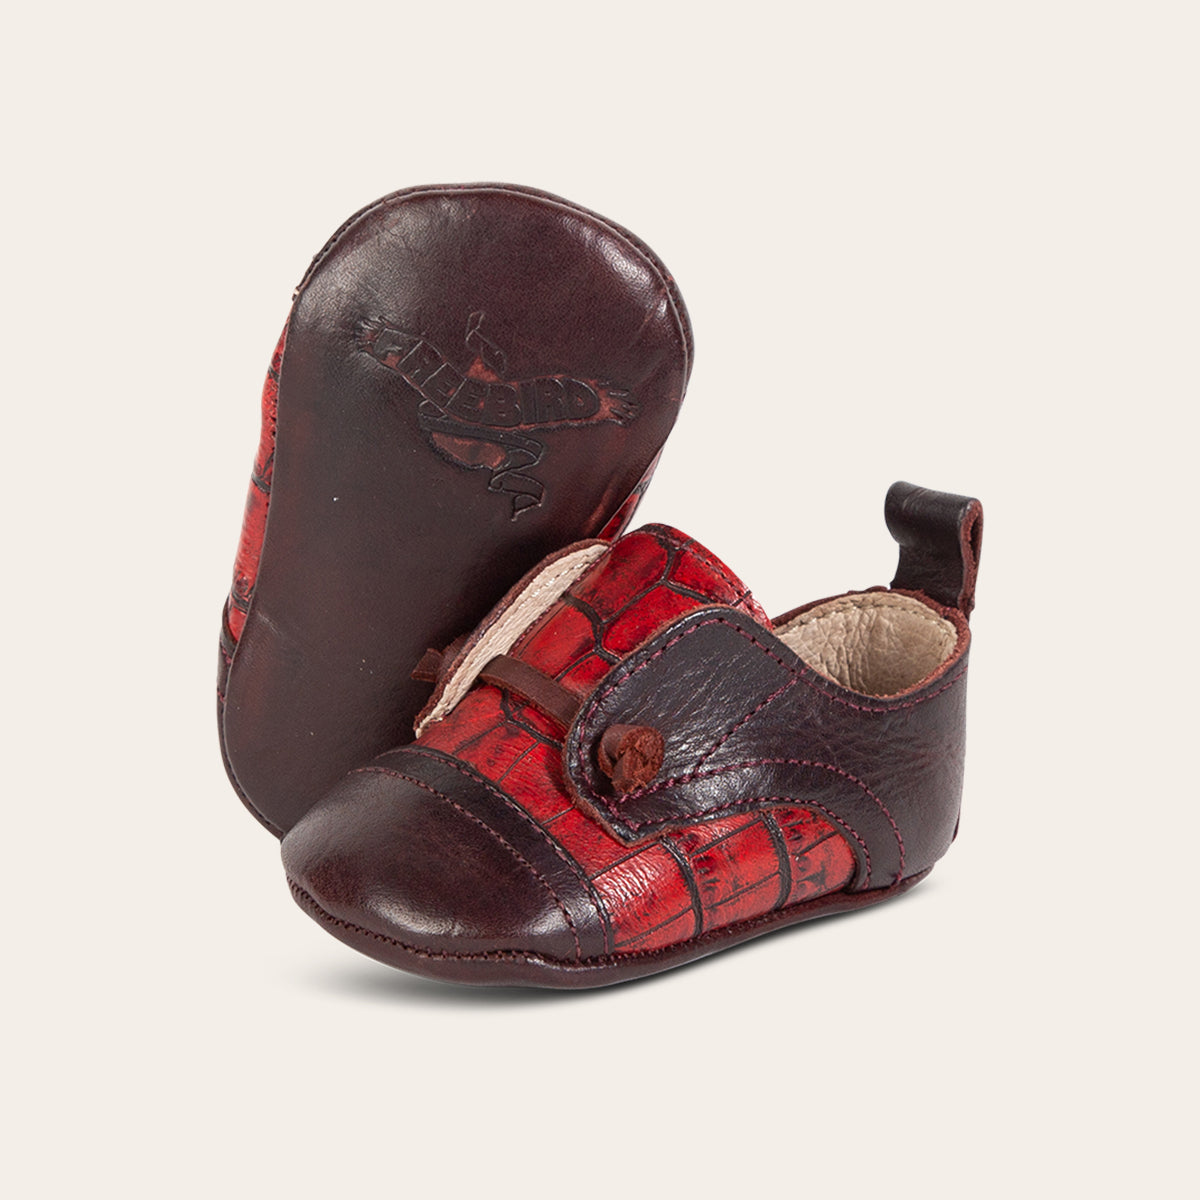 Side view showing decorative knotted leather lace and soft leather imprinted sole on FREEBIRD infant baby Mabel wine multi leather shoe